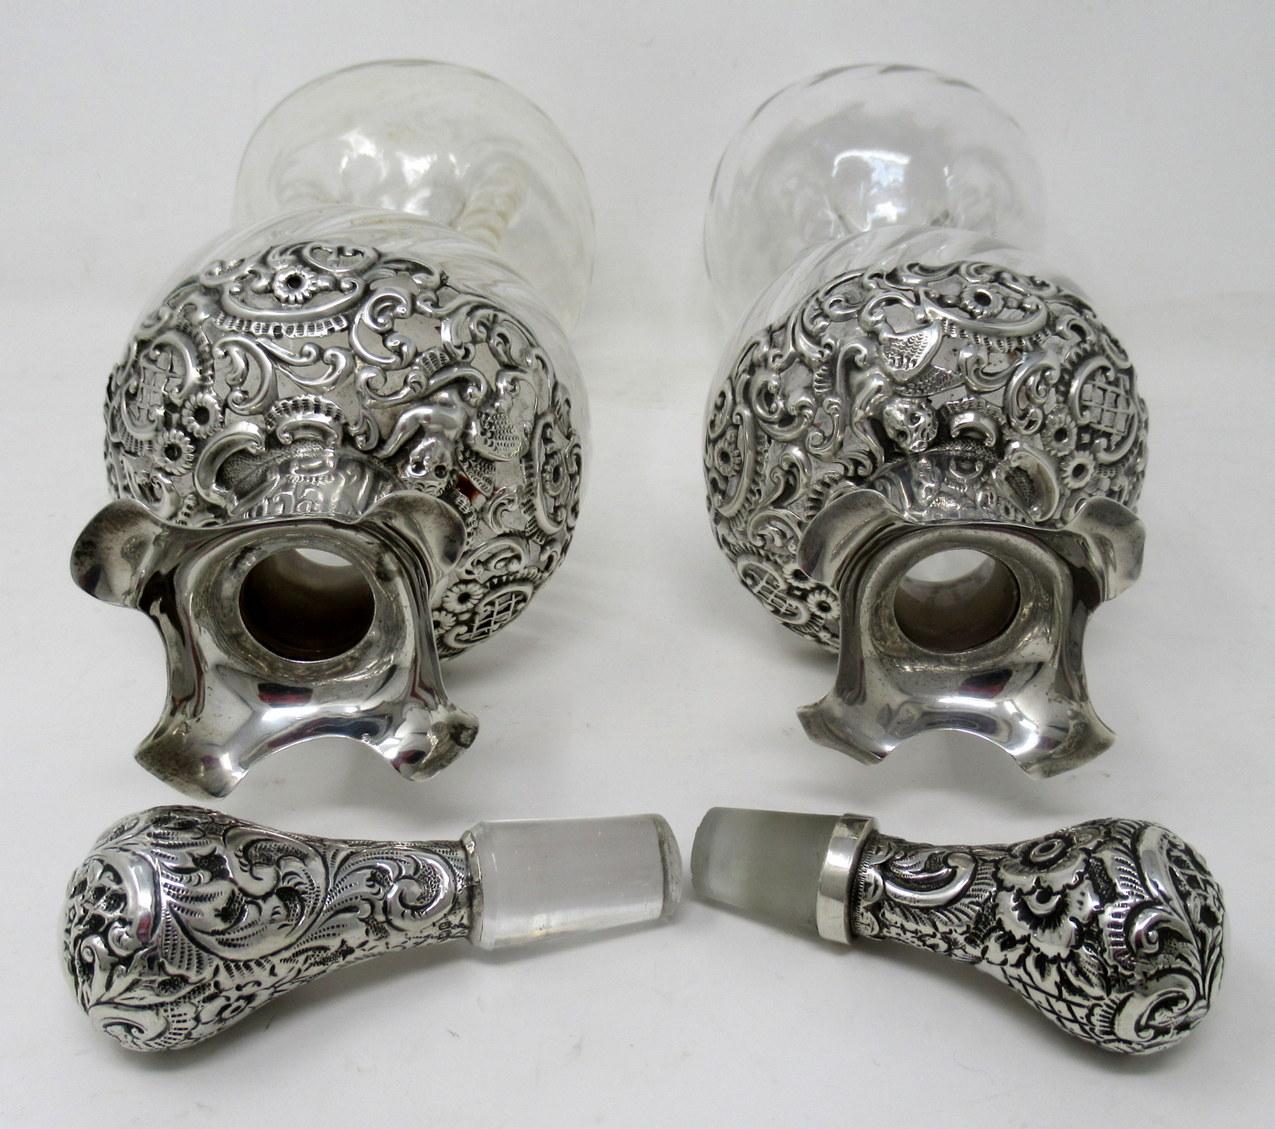 Pair of Full Lead Crystal Hallmark Sterling Silver Spirits Wine Decanters, 1899 4